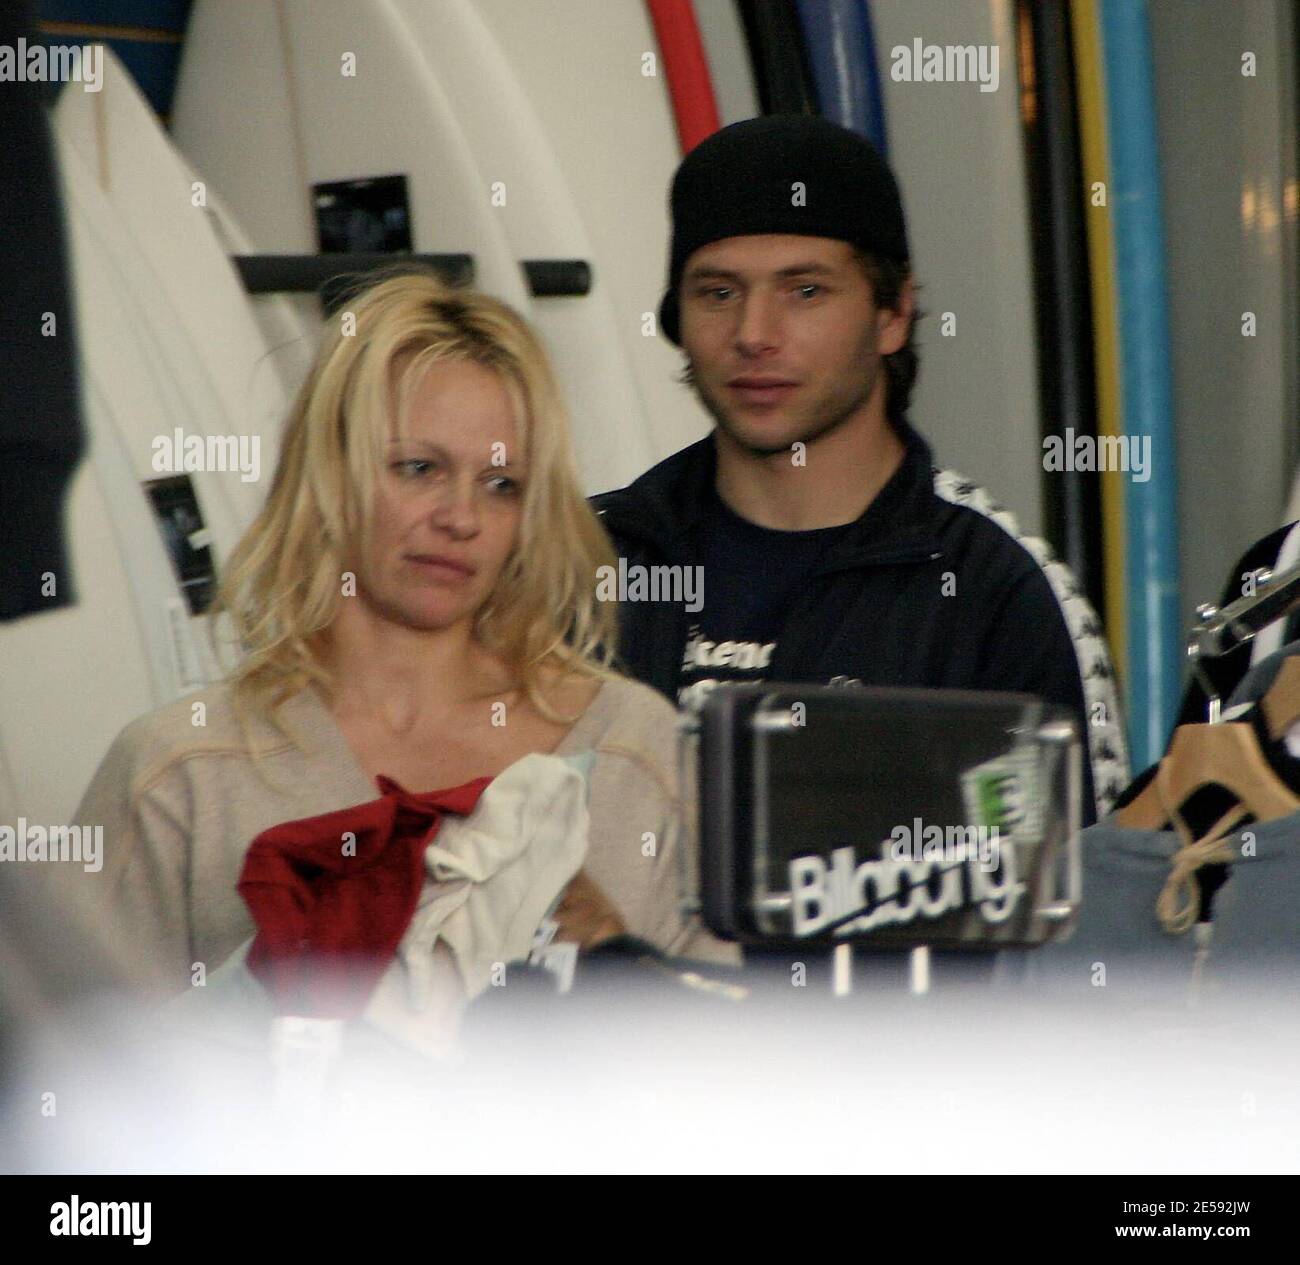 Exclusive!! Pamela Anderson and her husband Rick Salomon go Christmas  shopping for the kids at a surfing store near Anderson's home. The actress  was still without a wedding ring and was dressed